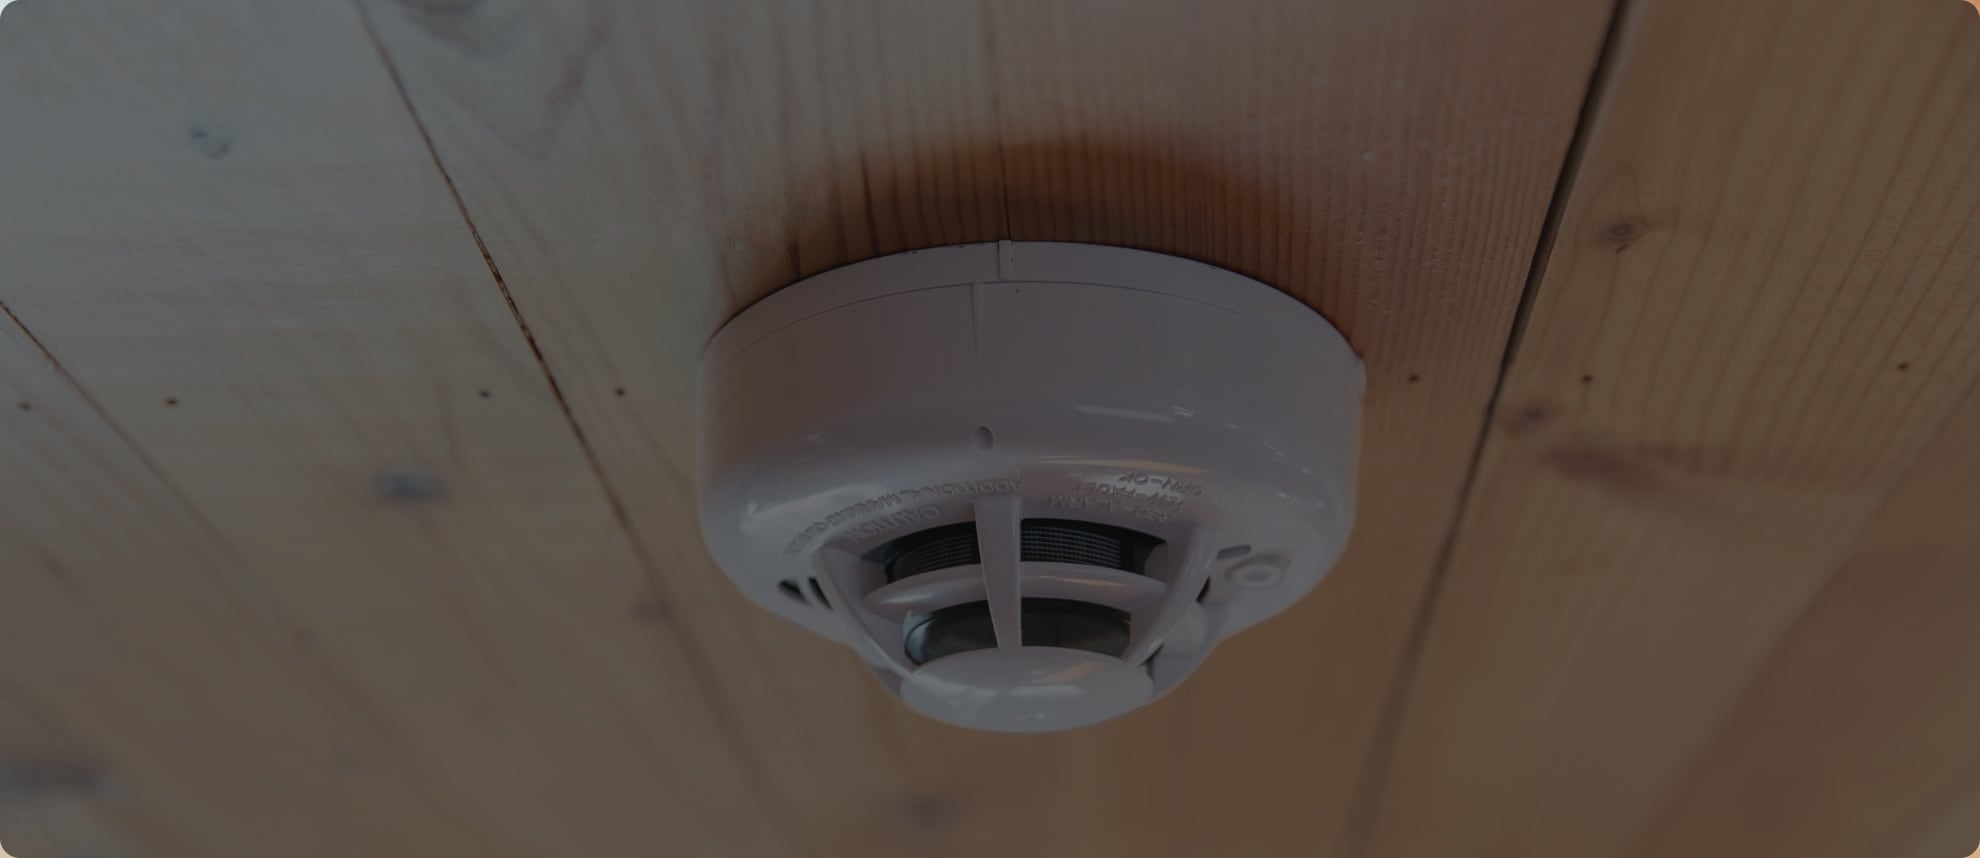 Vivint Monitored Smoke Alarm in Des Moines